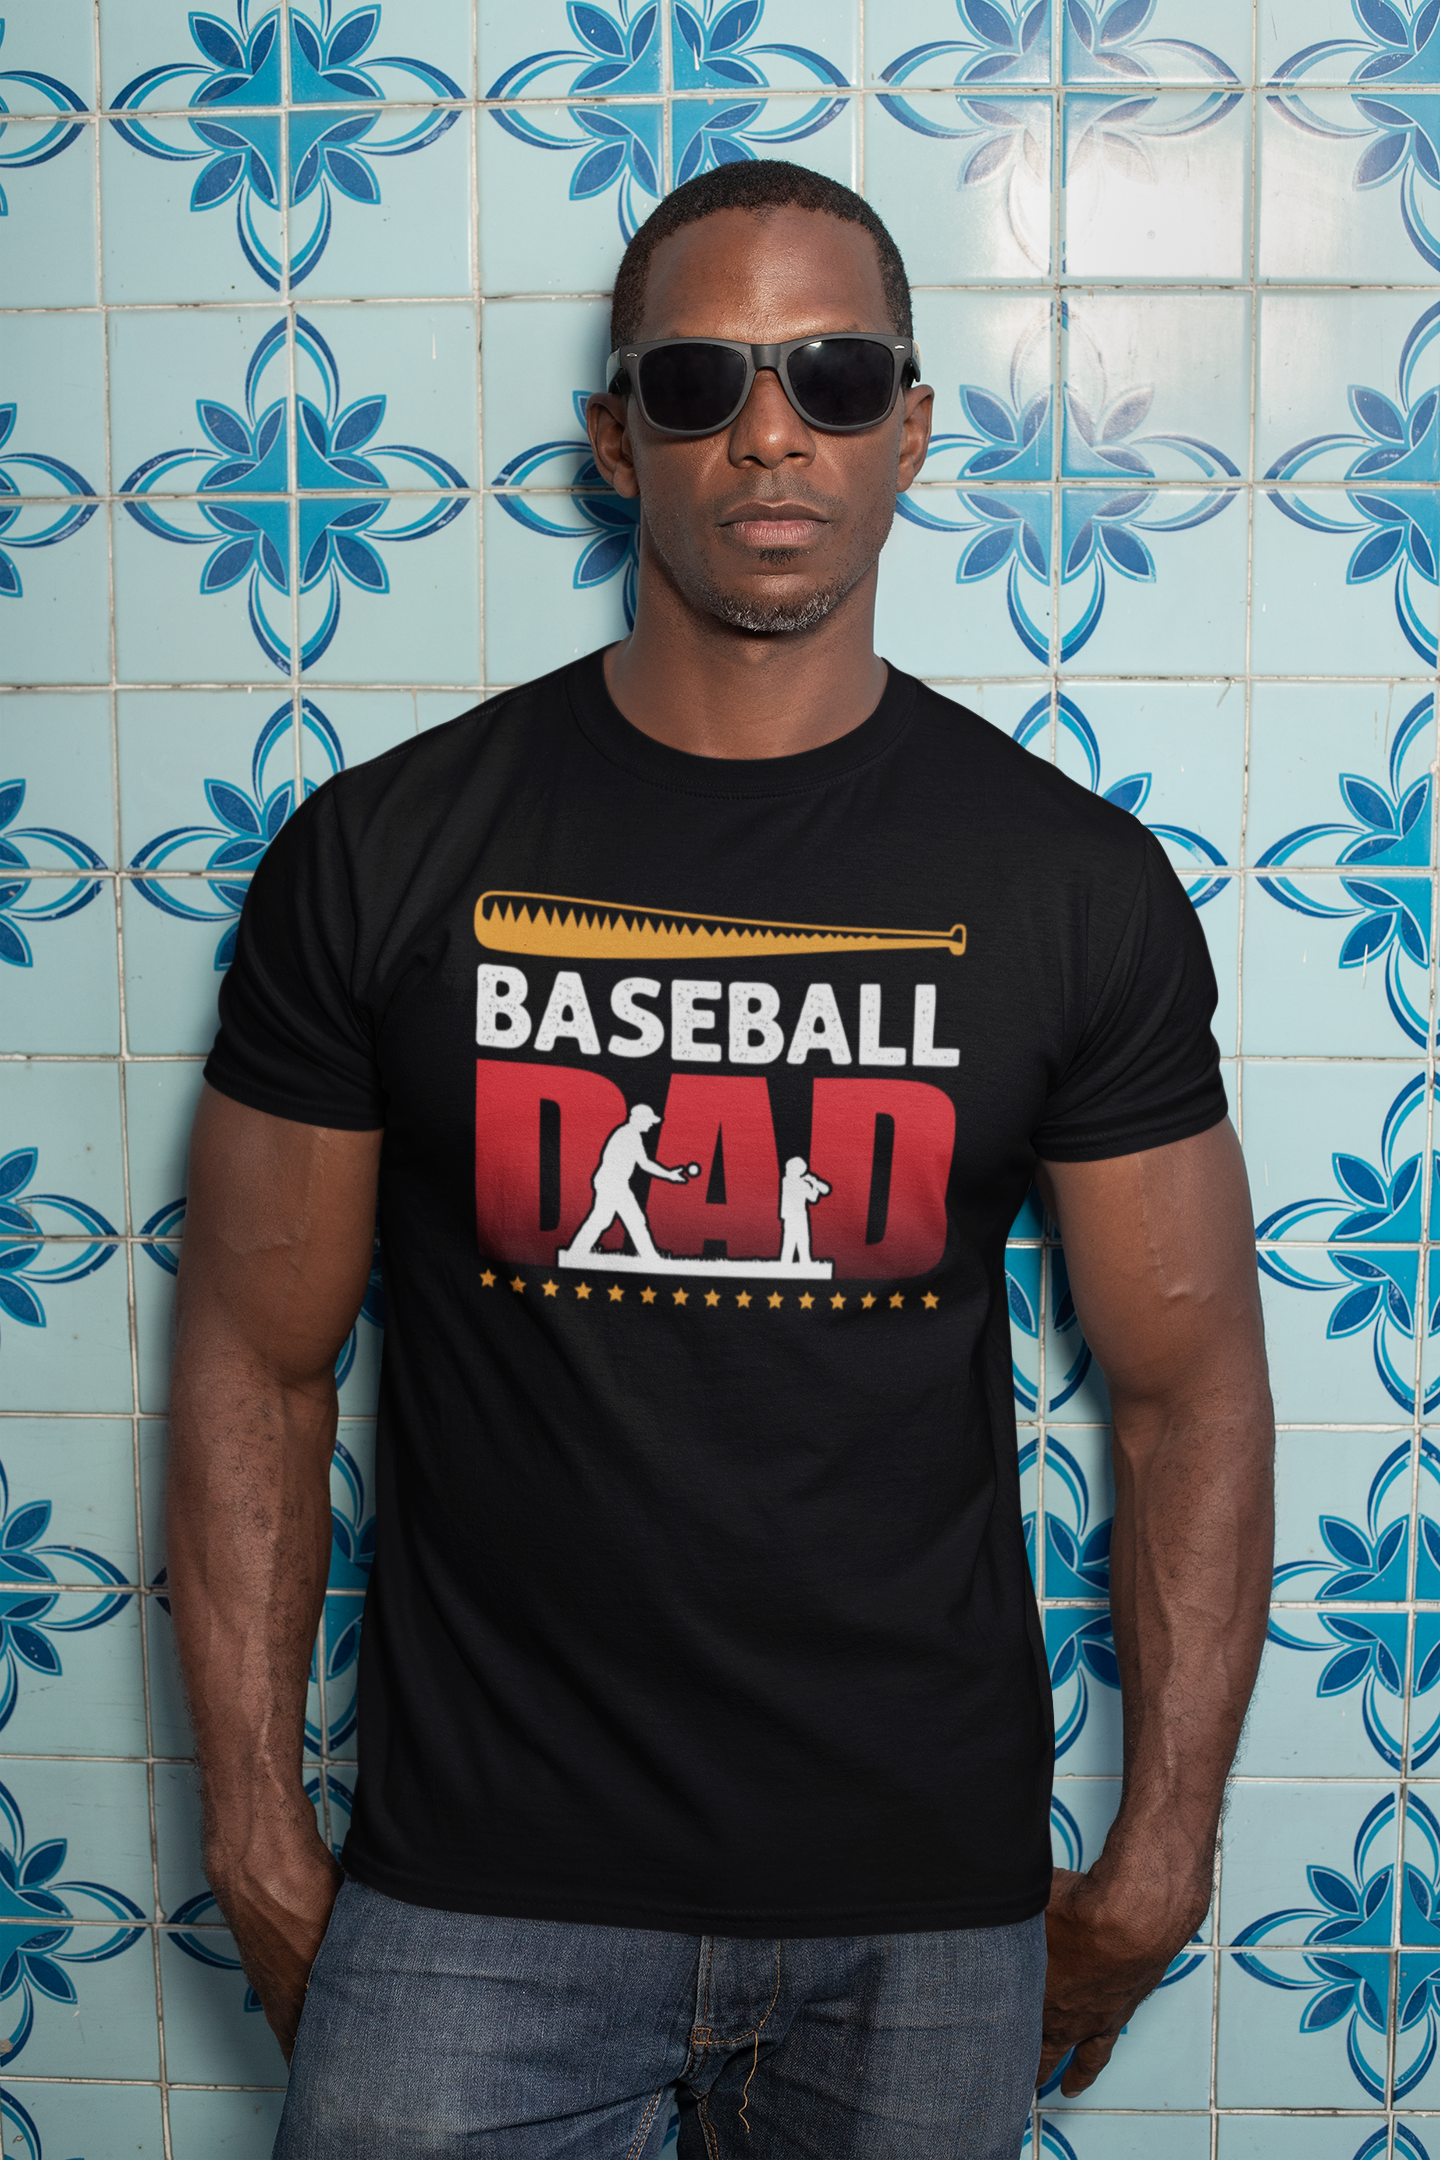 ULTRABASIC Men's Graphic T-Shirt Baseball Dad - Daddy And Son - Love Family